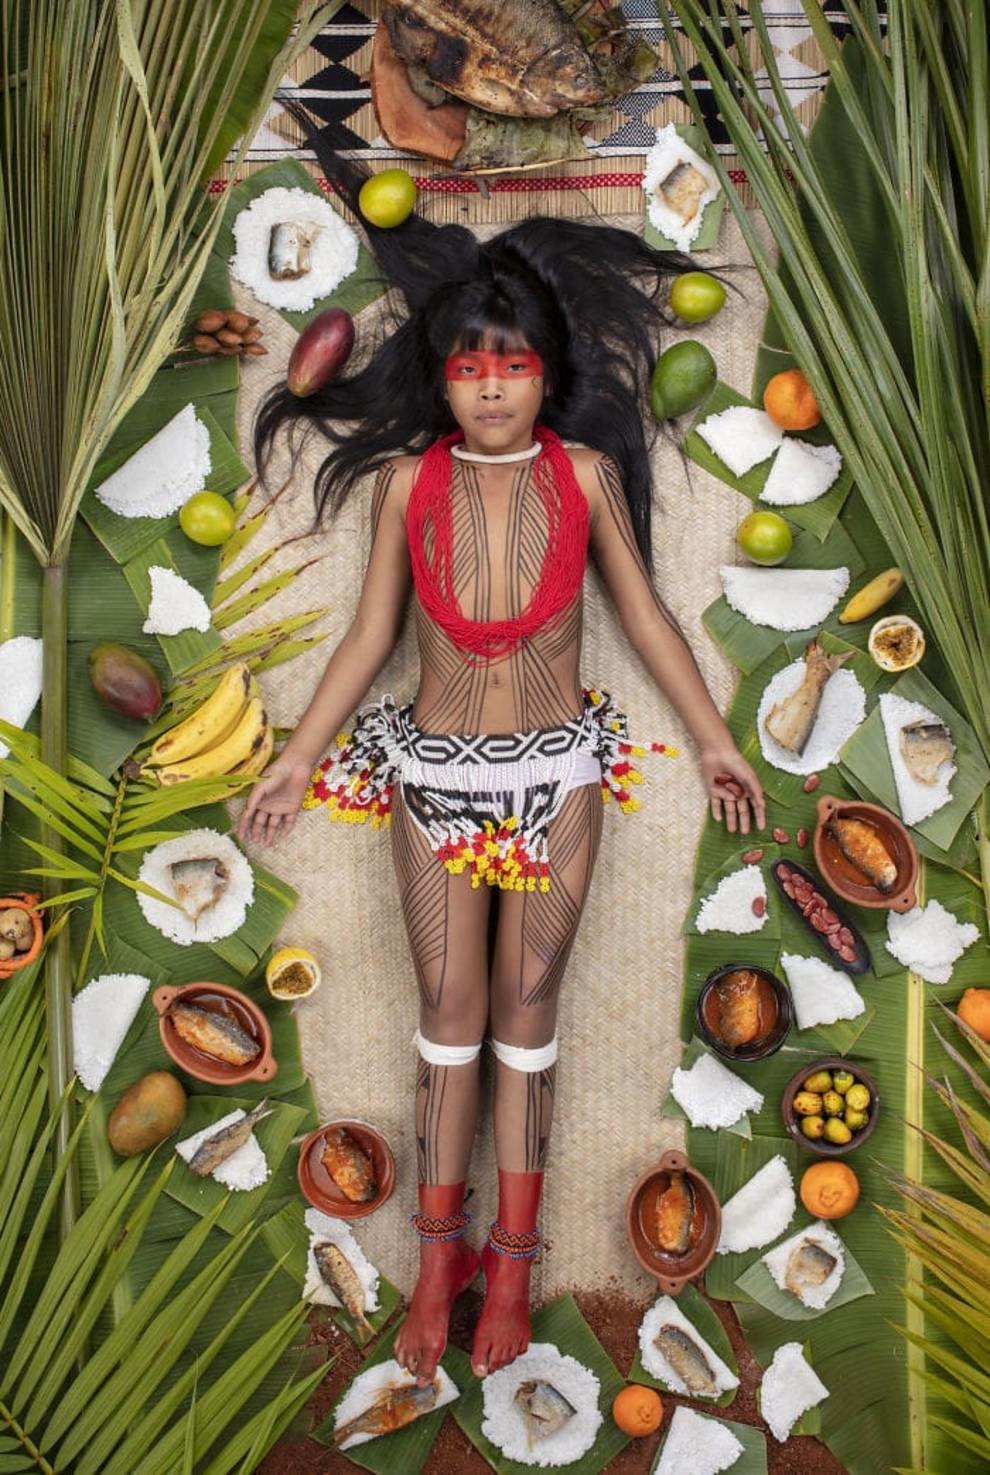 The photographer showed a weekly menu of children from all over the world (Photo)